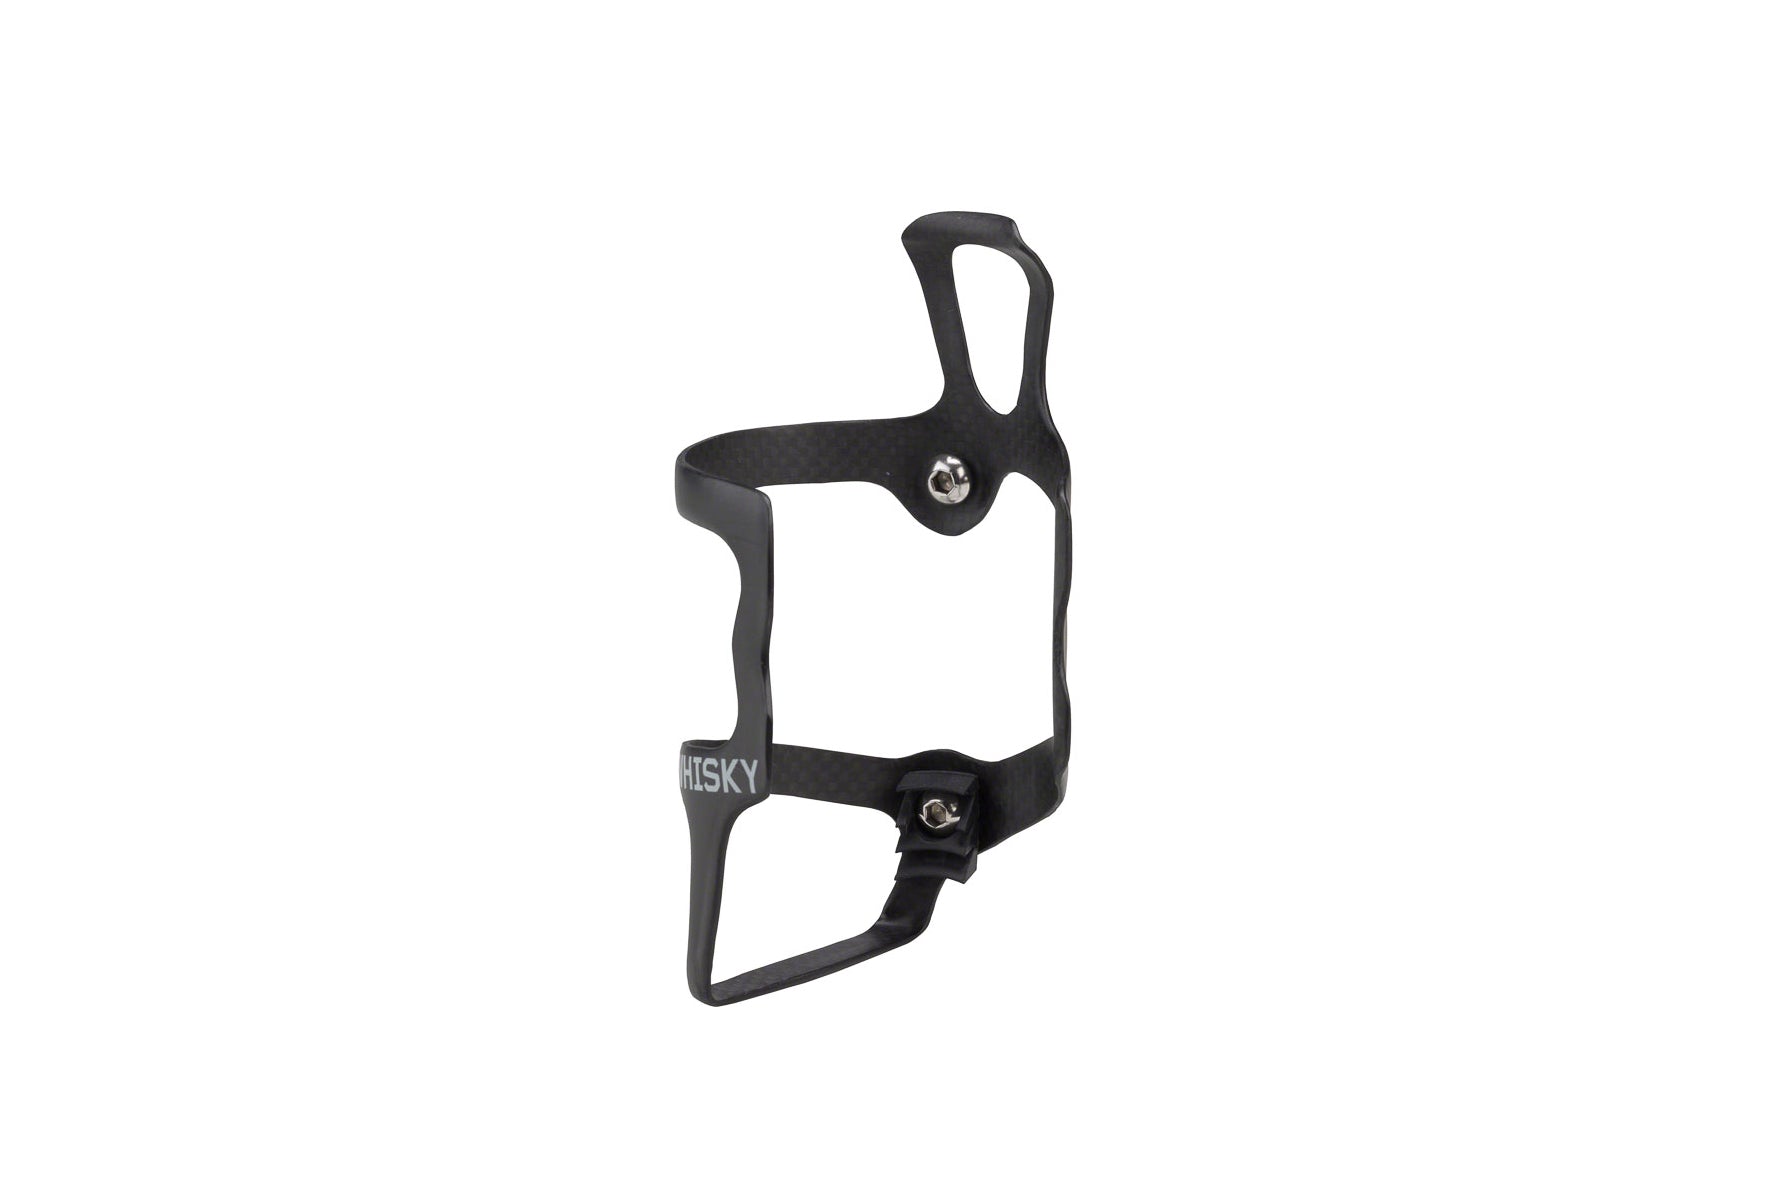 WHISKY No.9 Carbon Water Bottle Cage Right Side